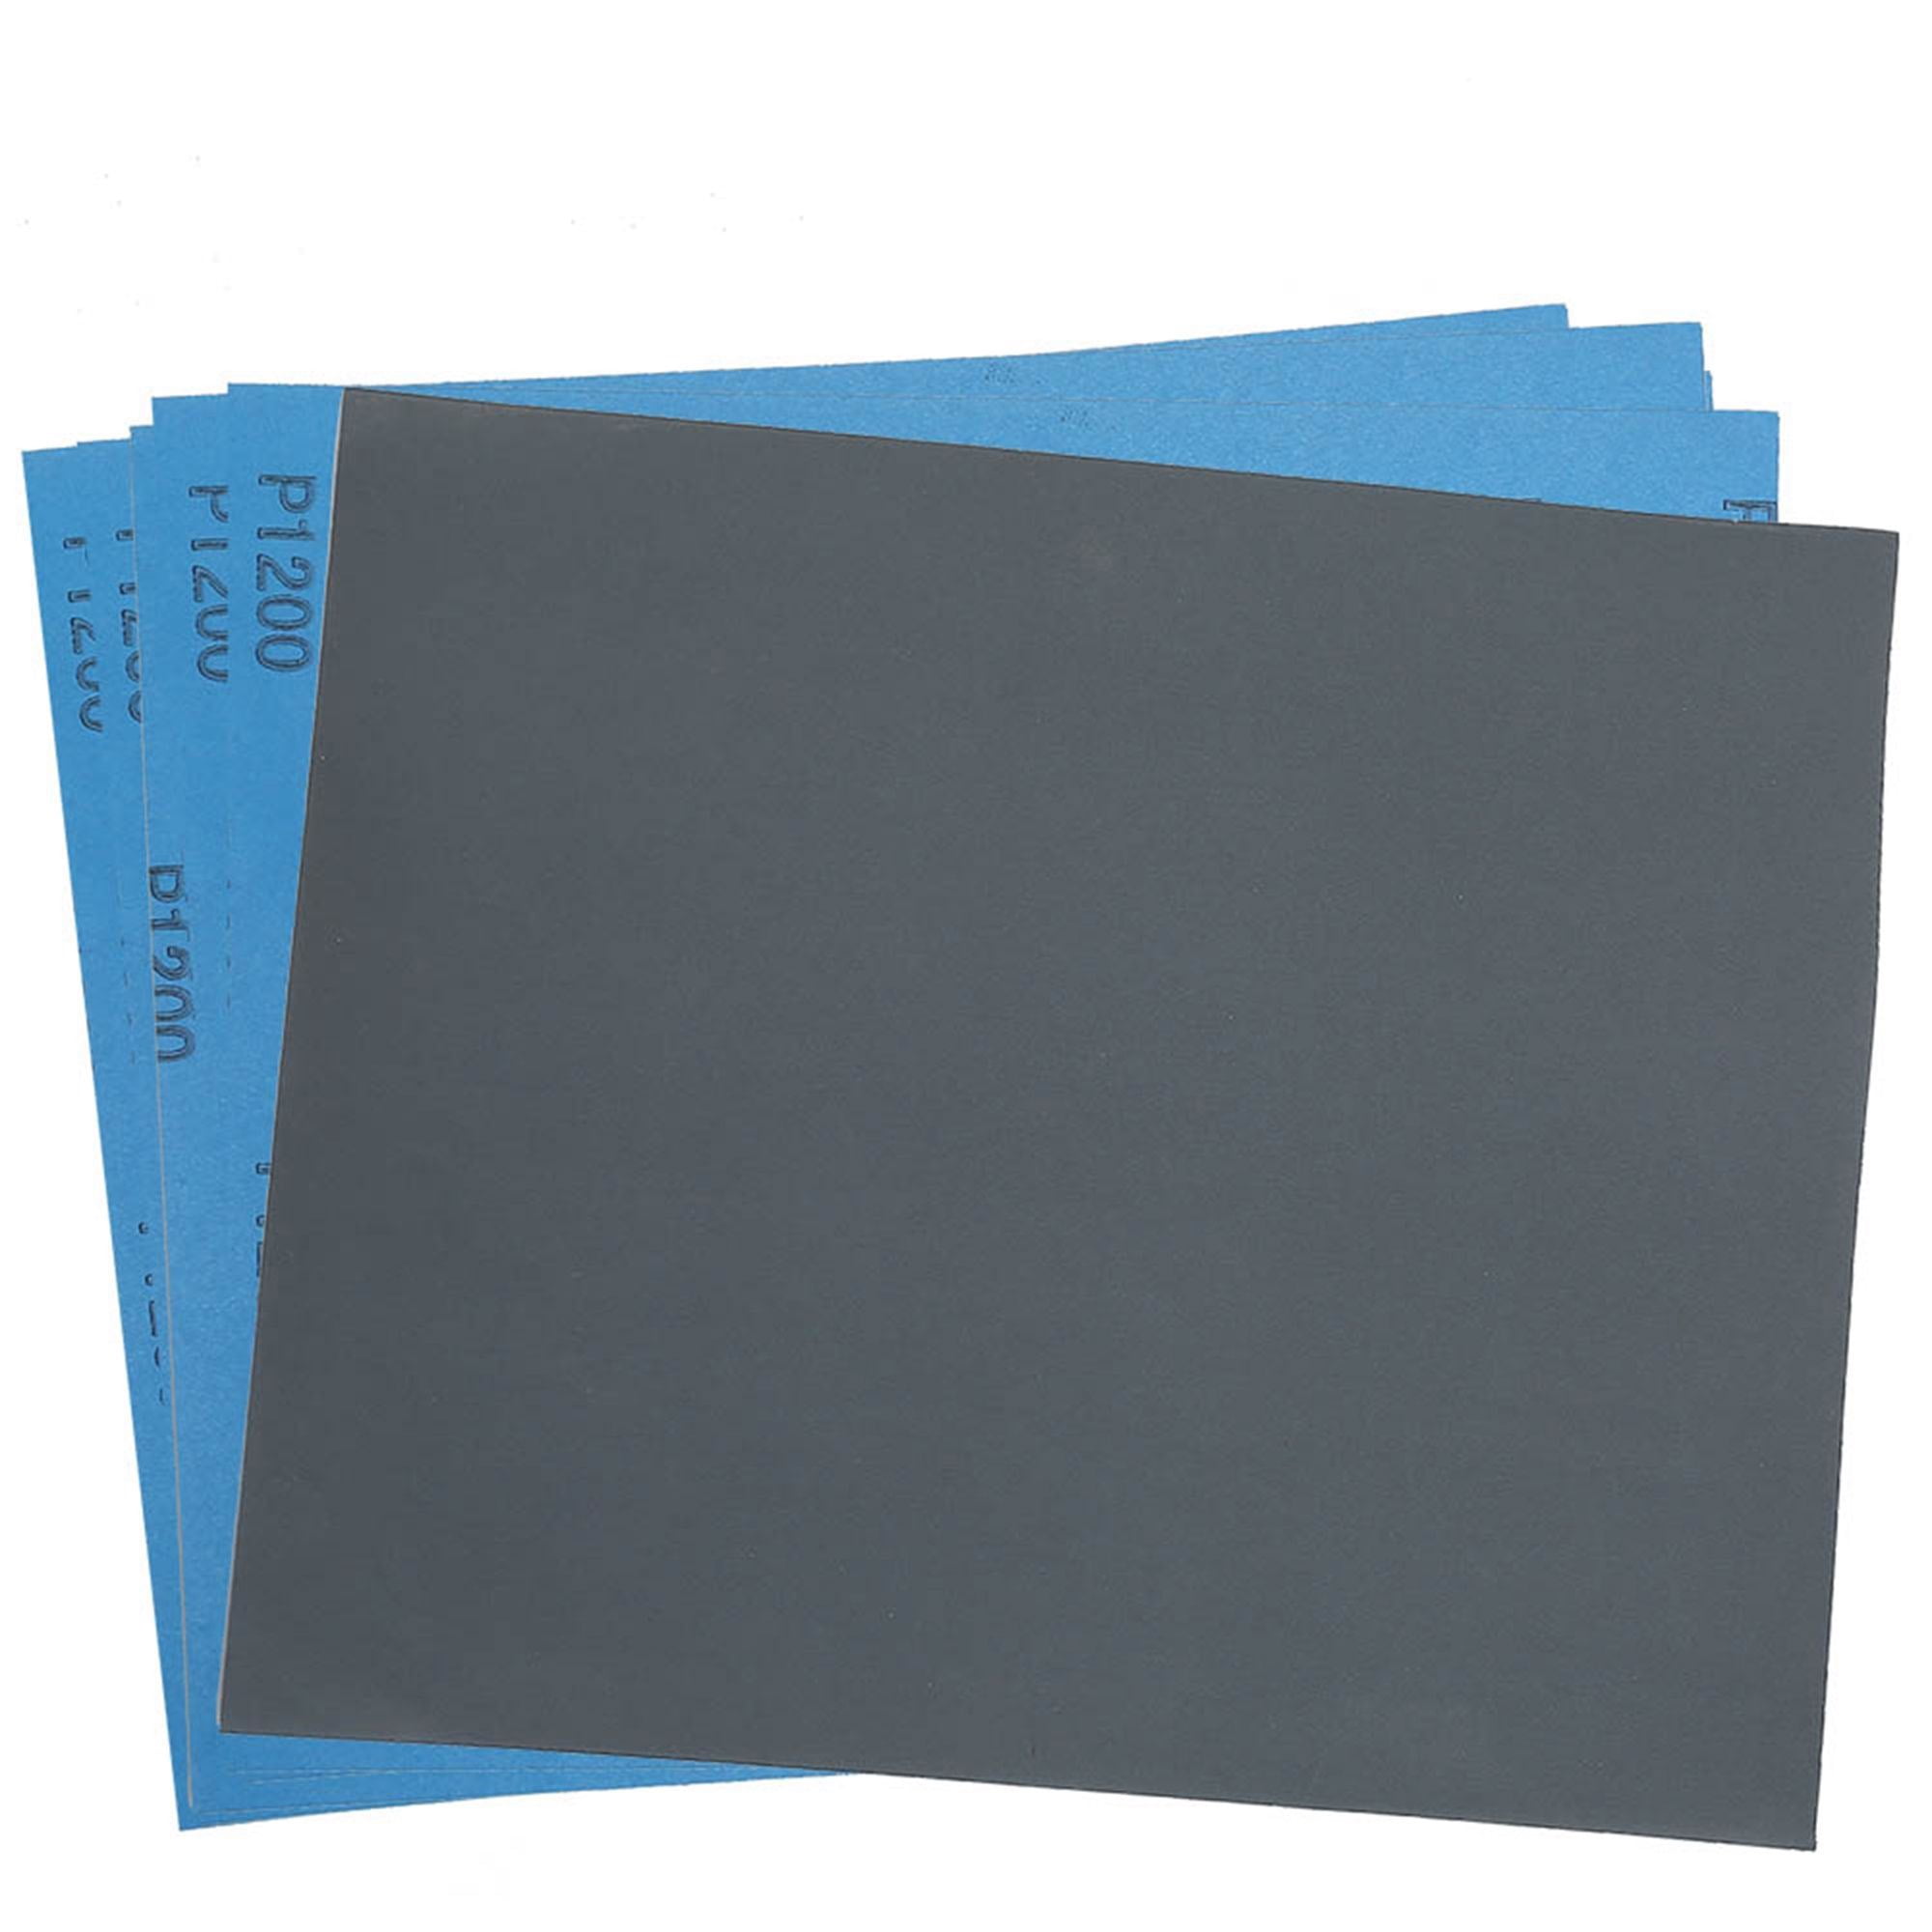 5 Sheets Sandpaper 2000 Grit Waterproof Paper 9x11 Wet/dry Silicon Carbide 